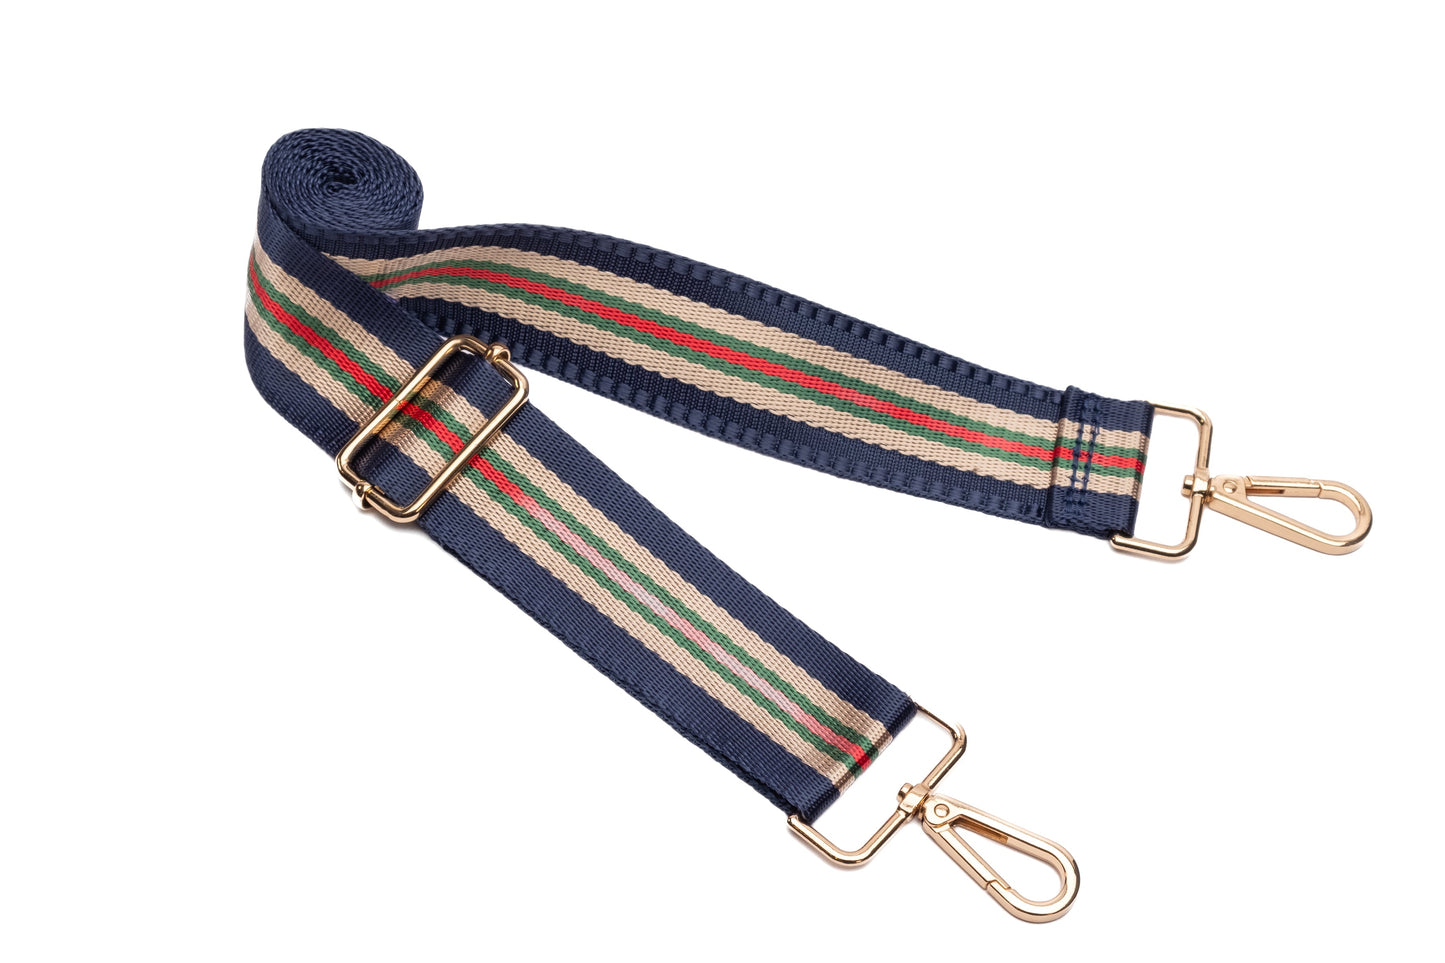 Wholesale - Harvest Moon Coated Perforated Neoprene HydroBag with Navy/Red/Green Stripe & Navy/Tan/Red Strap